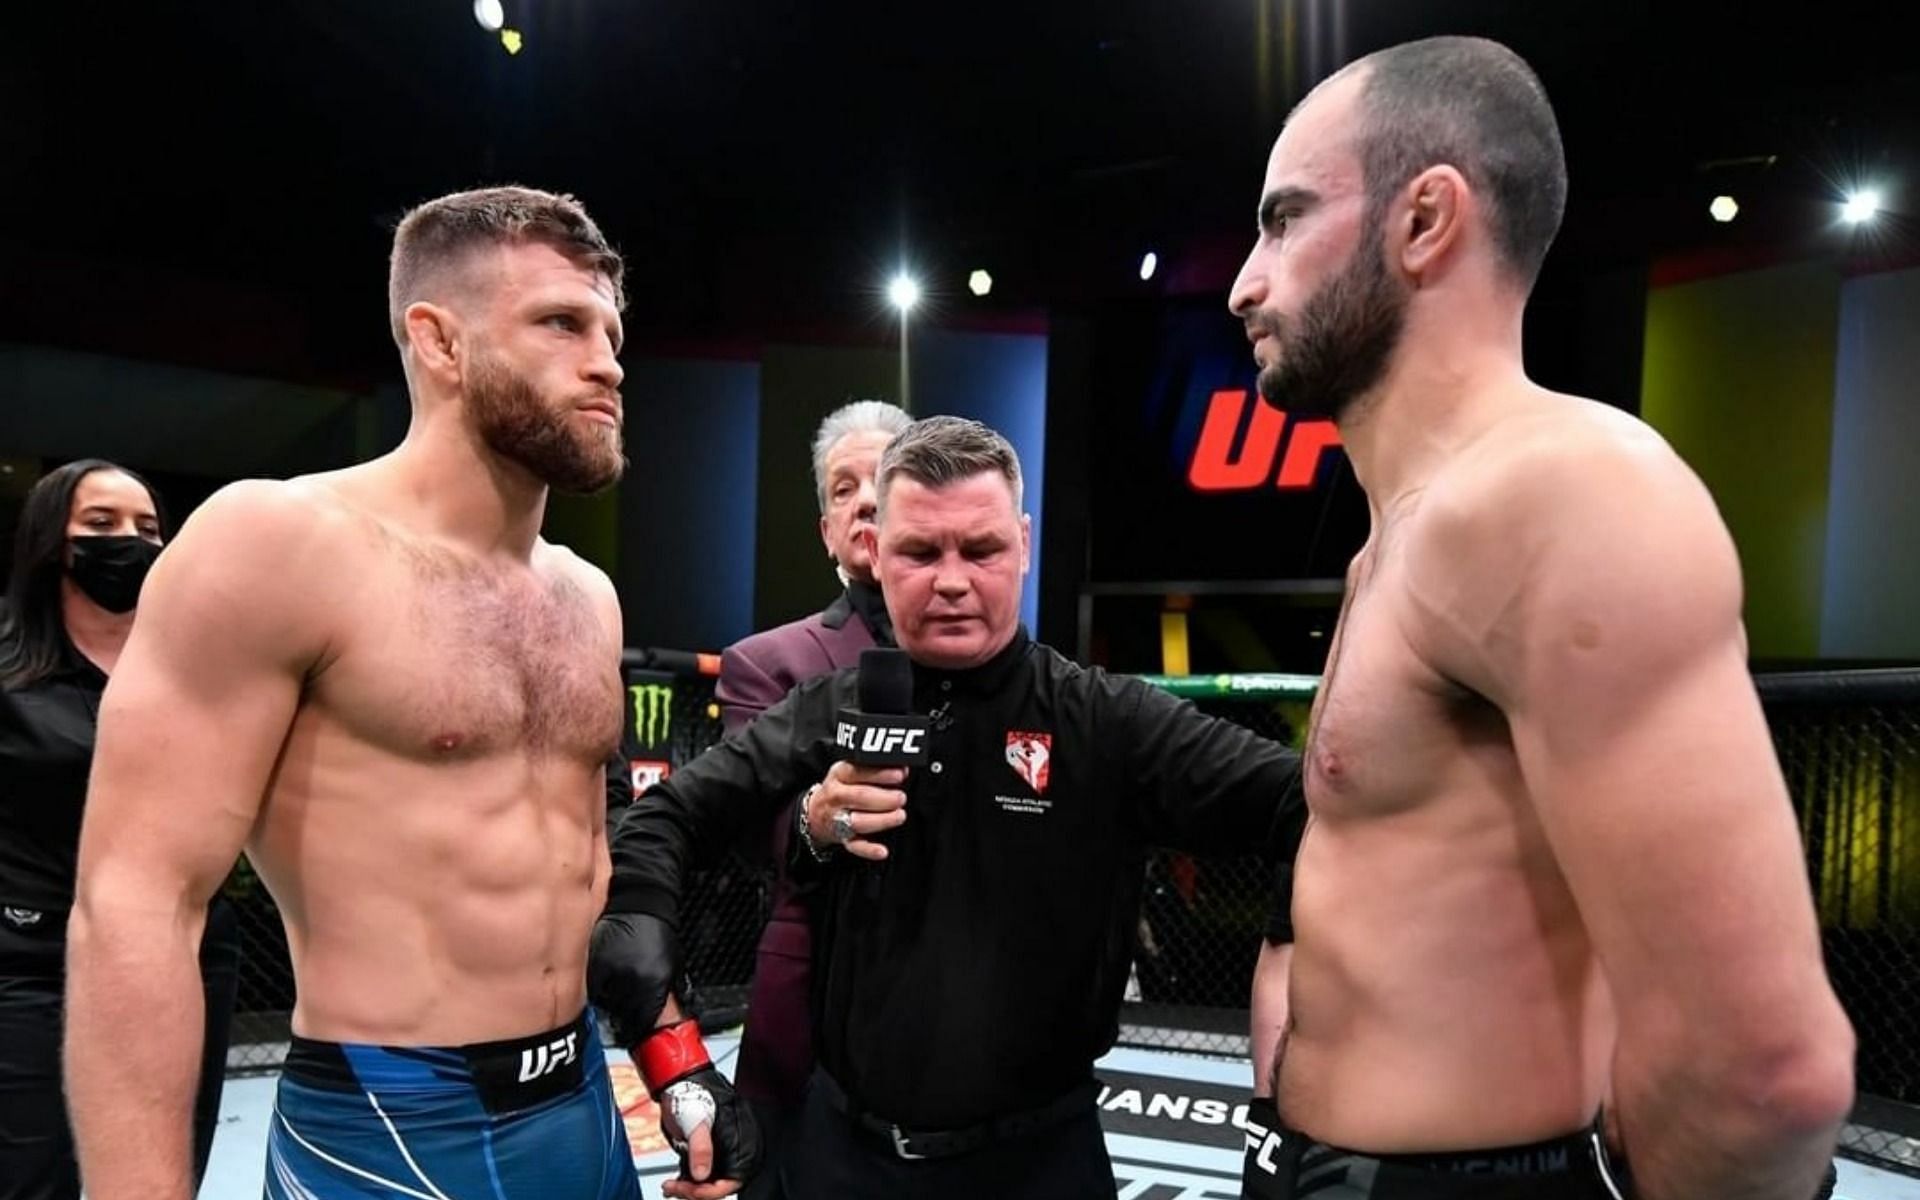 Calvin Kattar (left) and Giga Chikadze (right) look on ahead of their encounter [Image Credit: @ufc on Instagram]